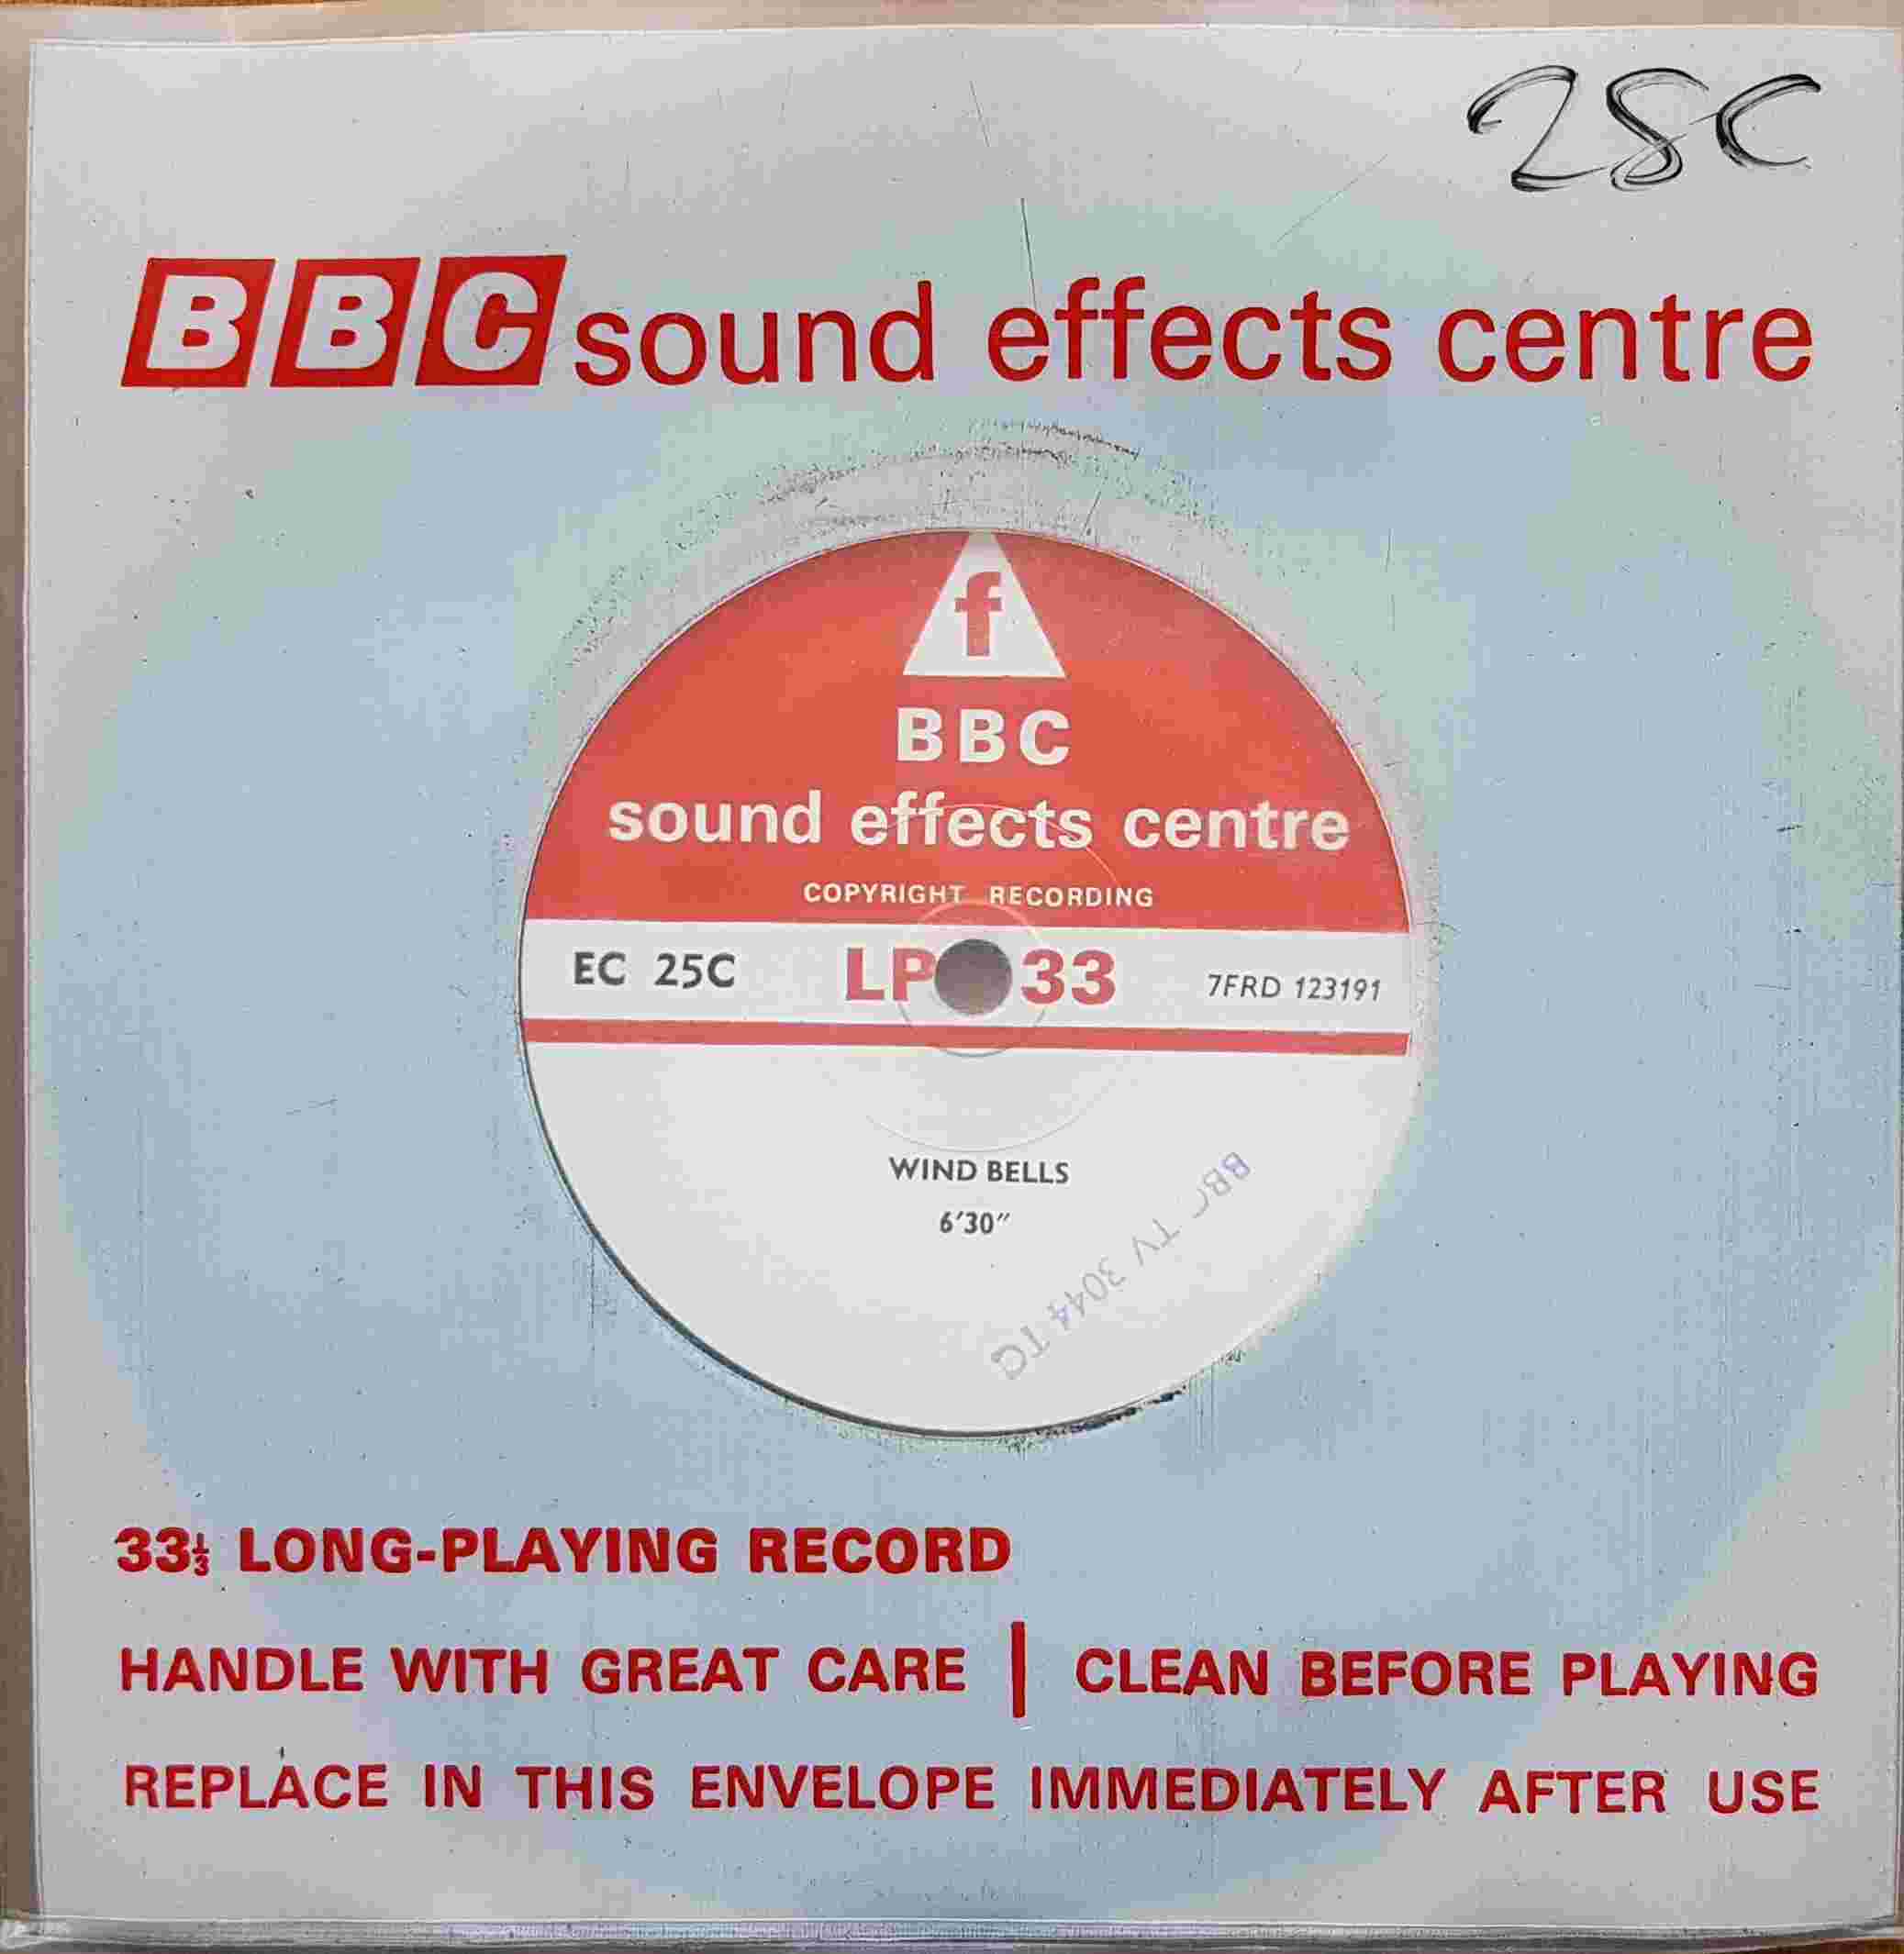 Picture of EC 25C Bells by artist Not registered from the BBC records and Tapes library